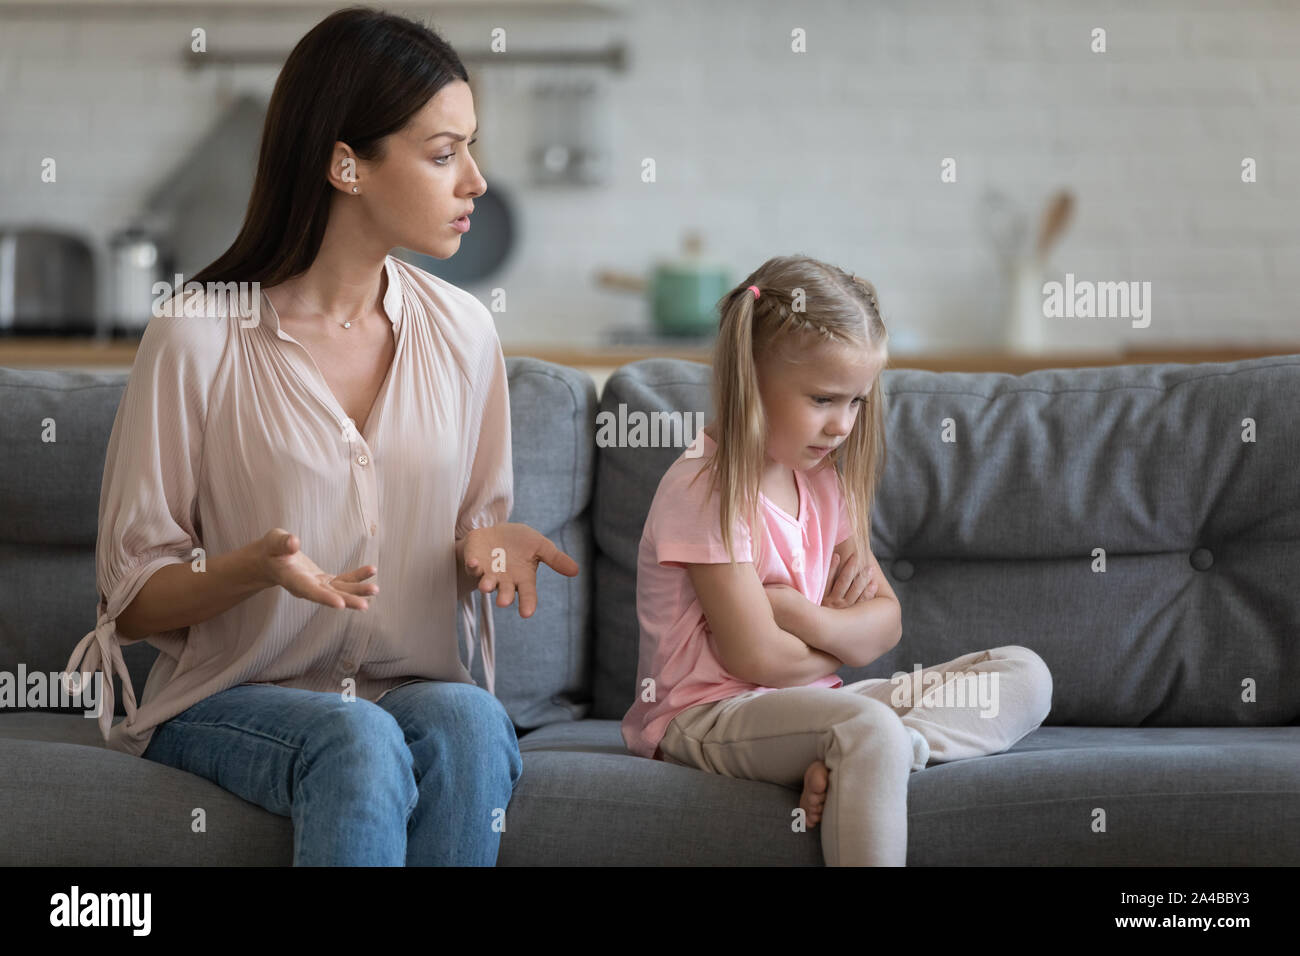 Stubborn upset little daughter ignoring strict mother, family conflict Stock Photo